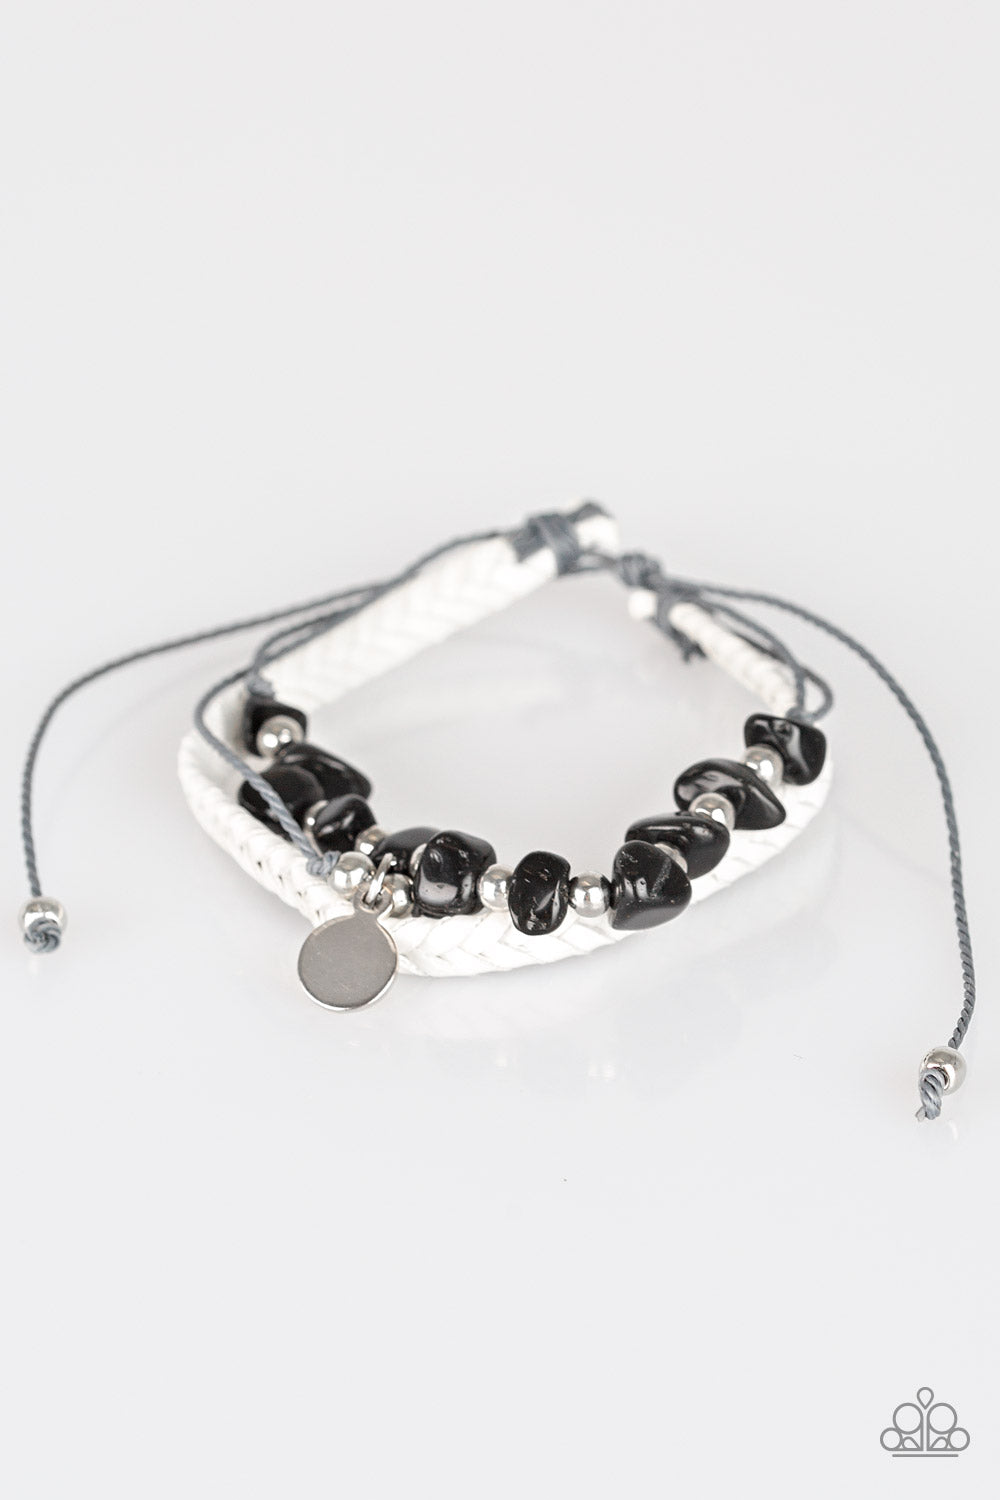 A PEACE OF WORK - BLACK POLISHED STONE SILVER CHARM WHITE BRAIDED DRAW STRING BRACELET